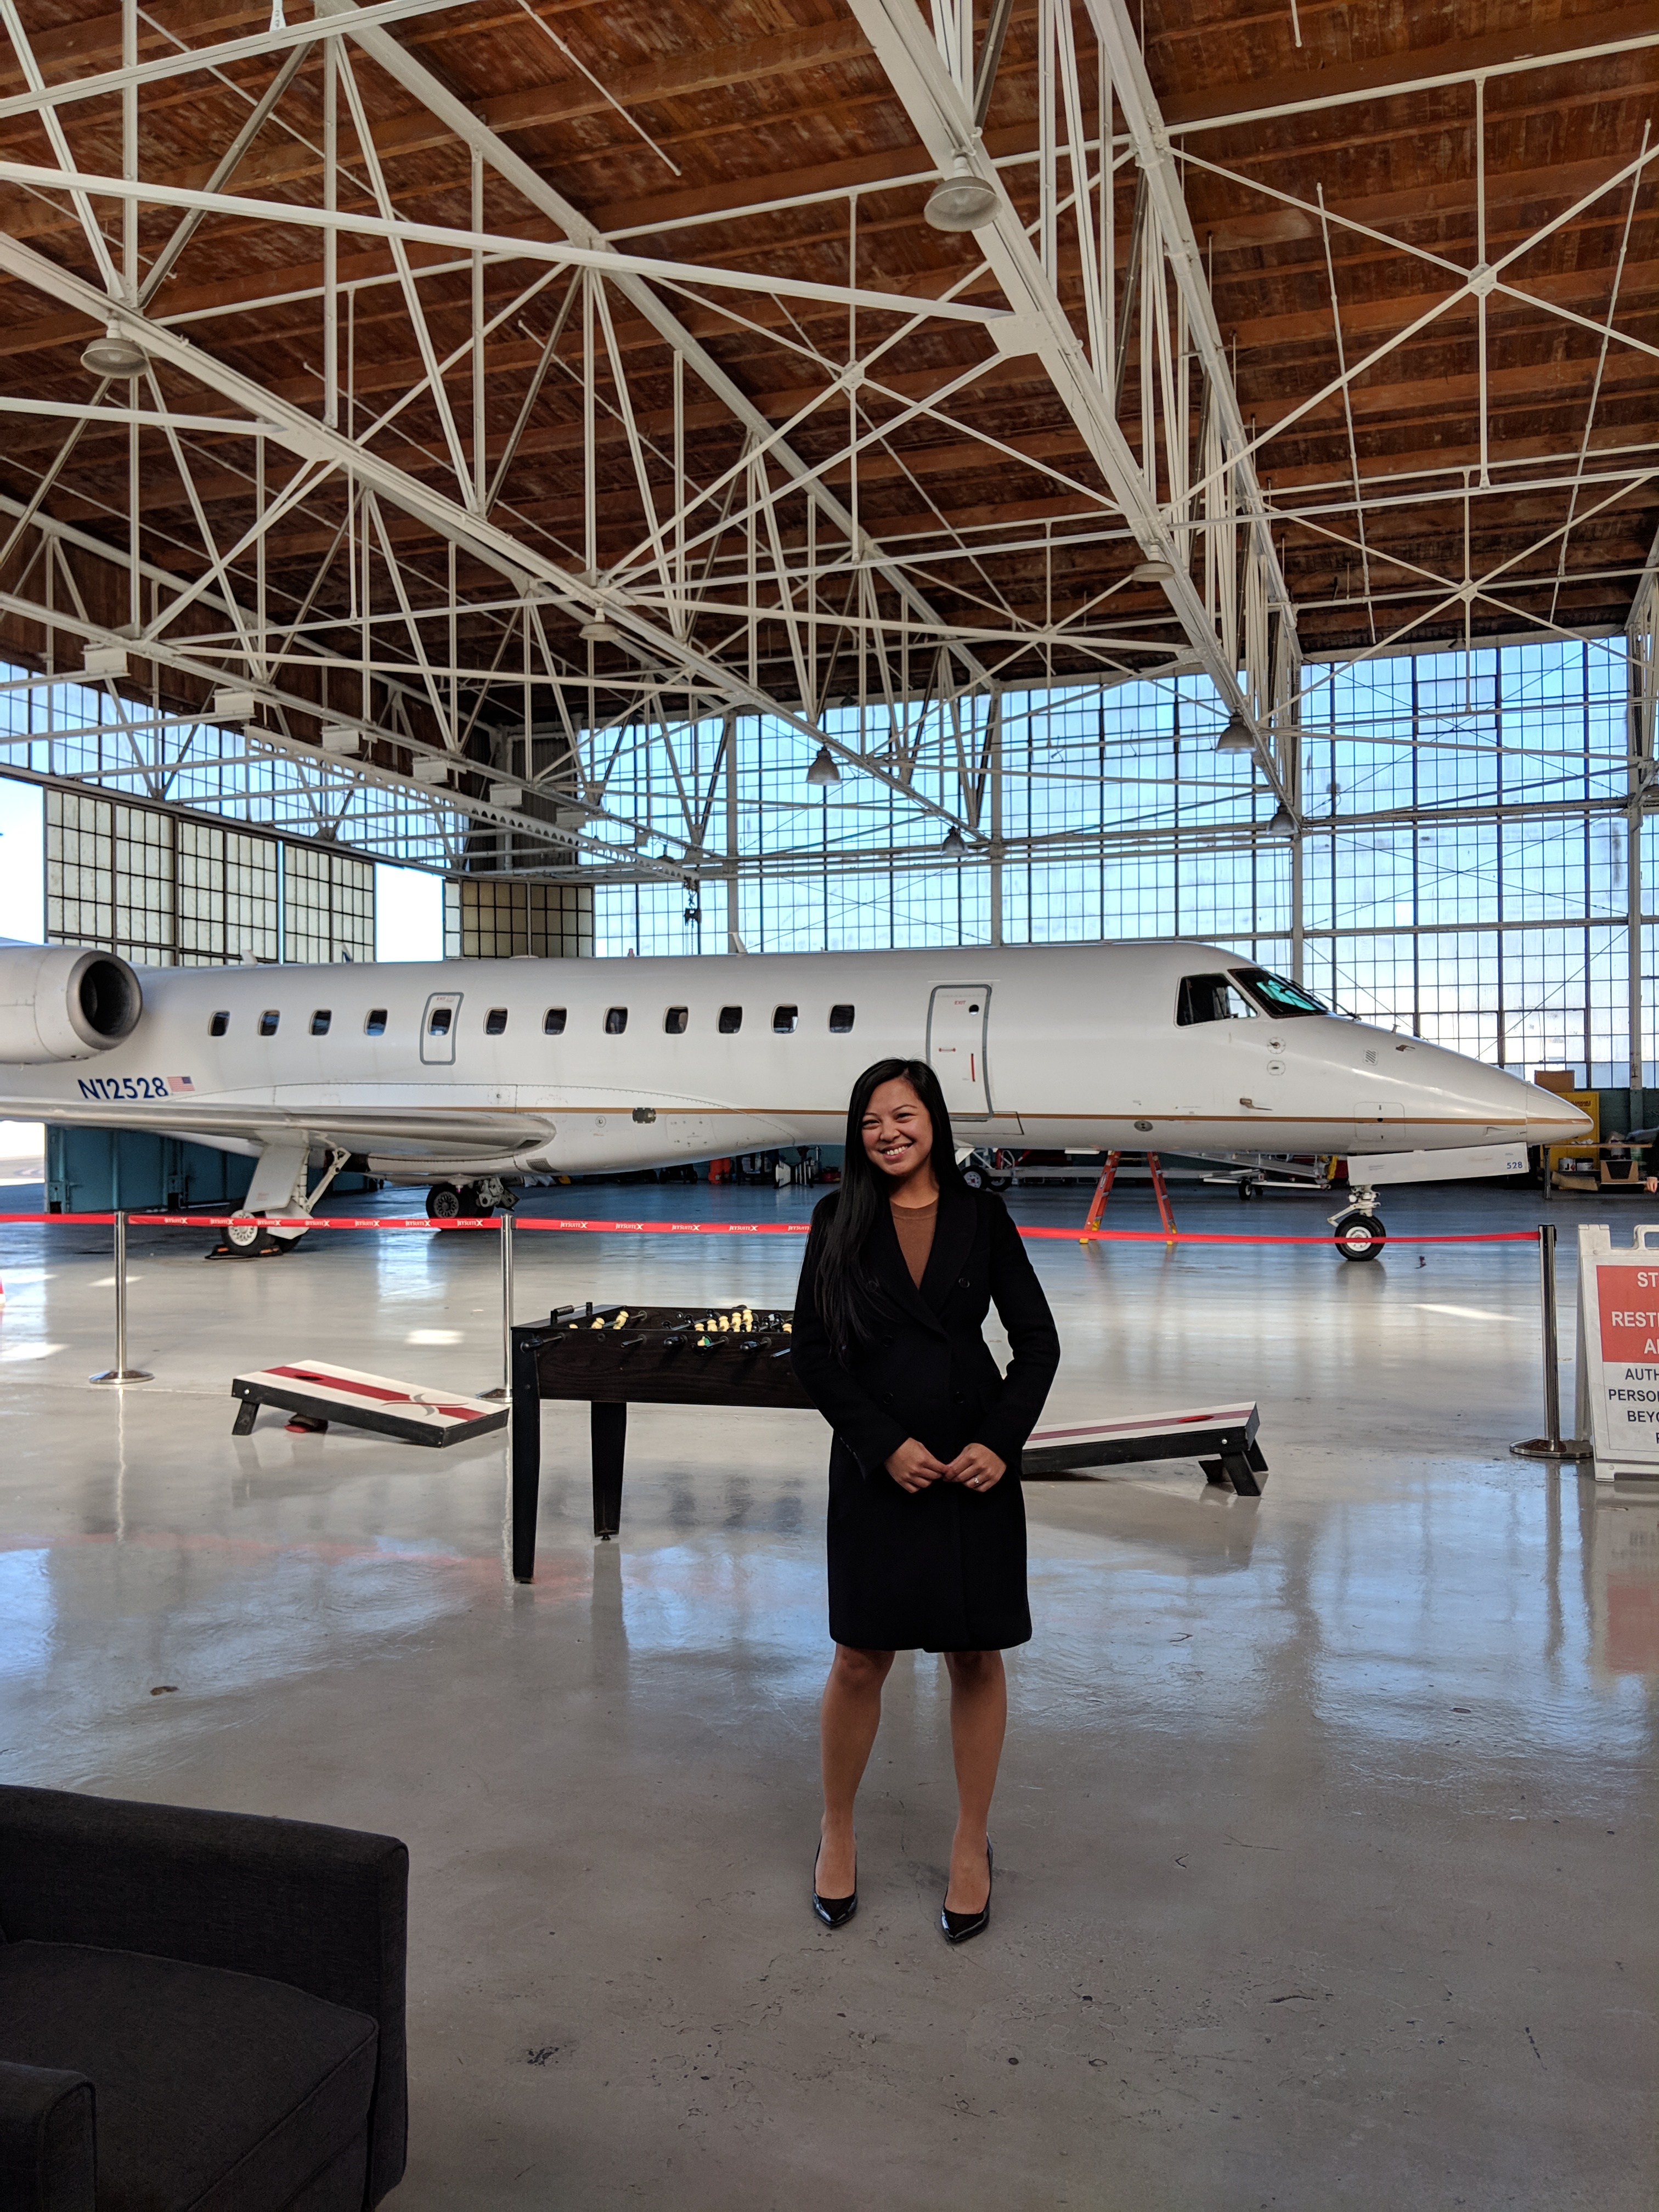 Adrienne flying to another tech conference, pictured in a hangar with a jet in the background